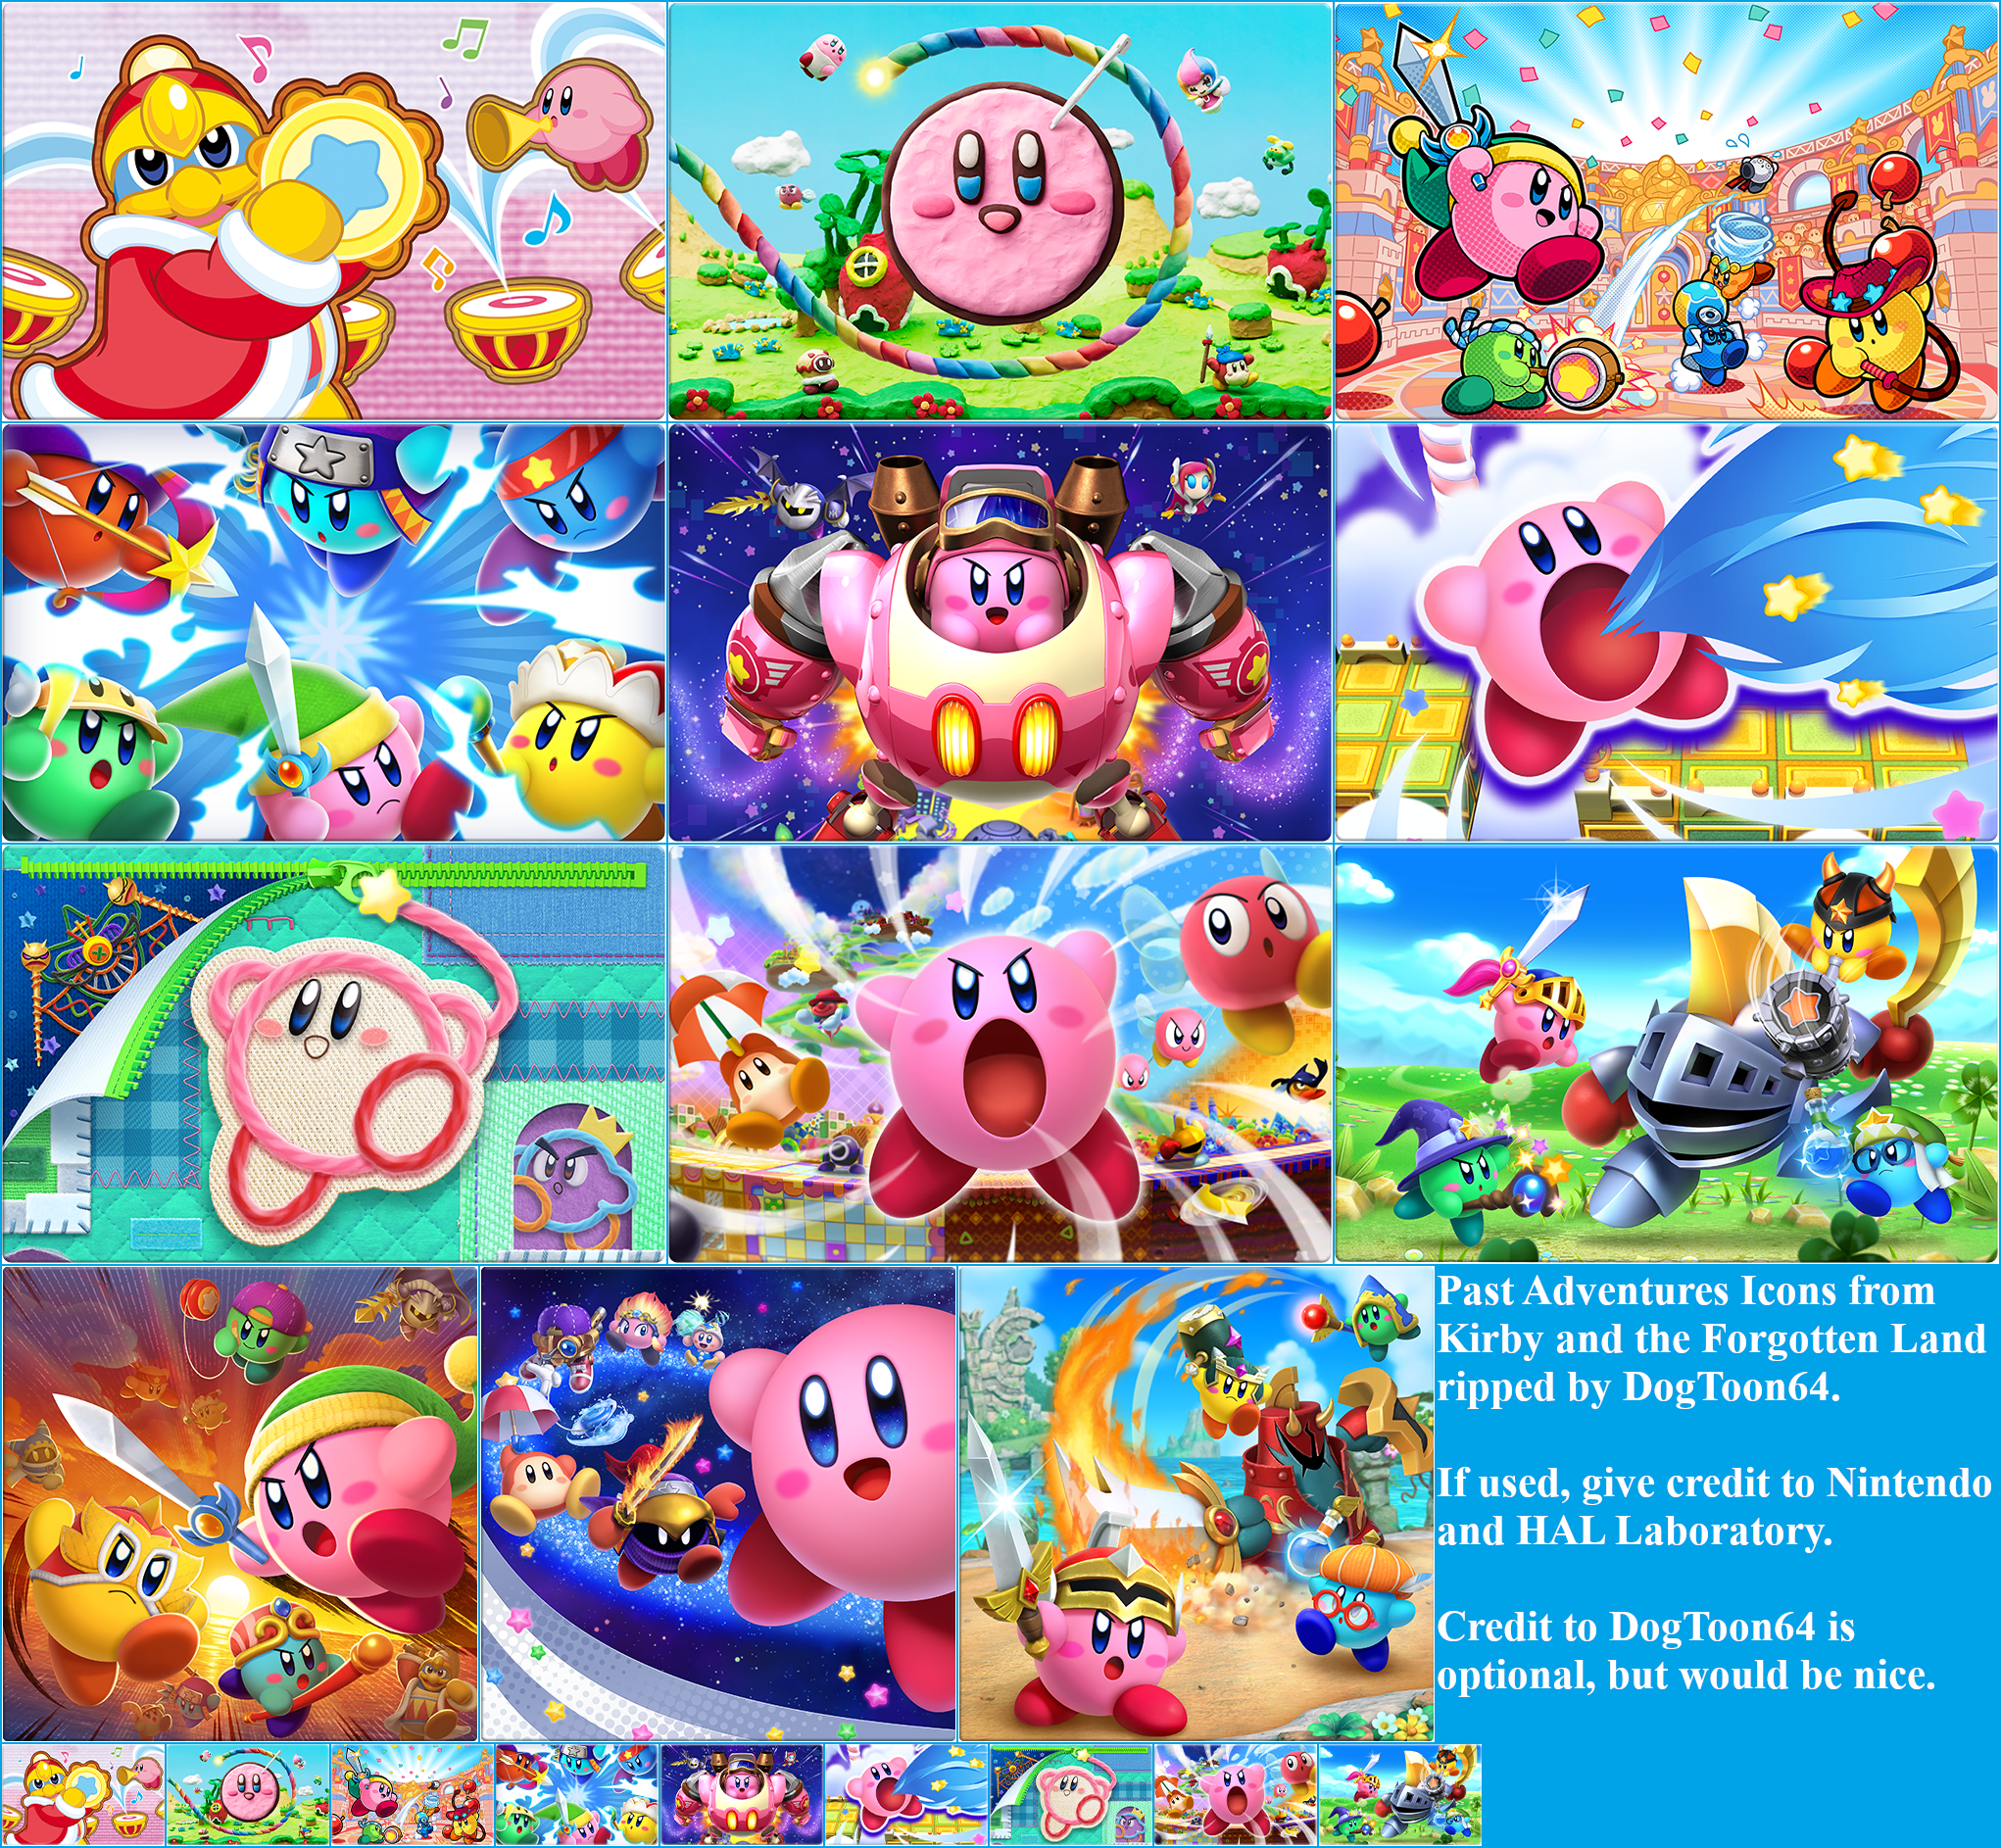 Kirby and the Forgotten Land - Past Adventures Icons